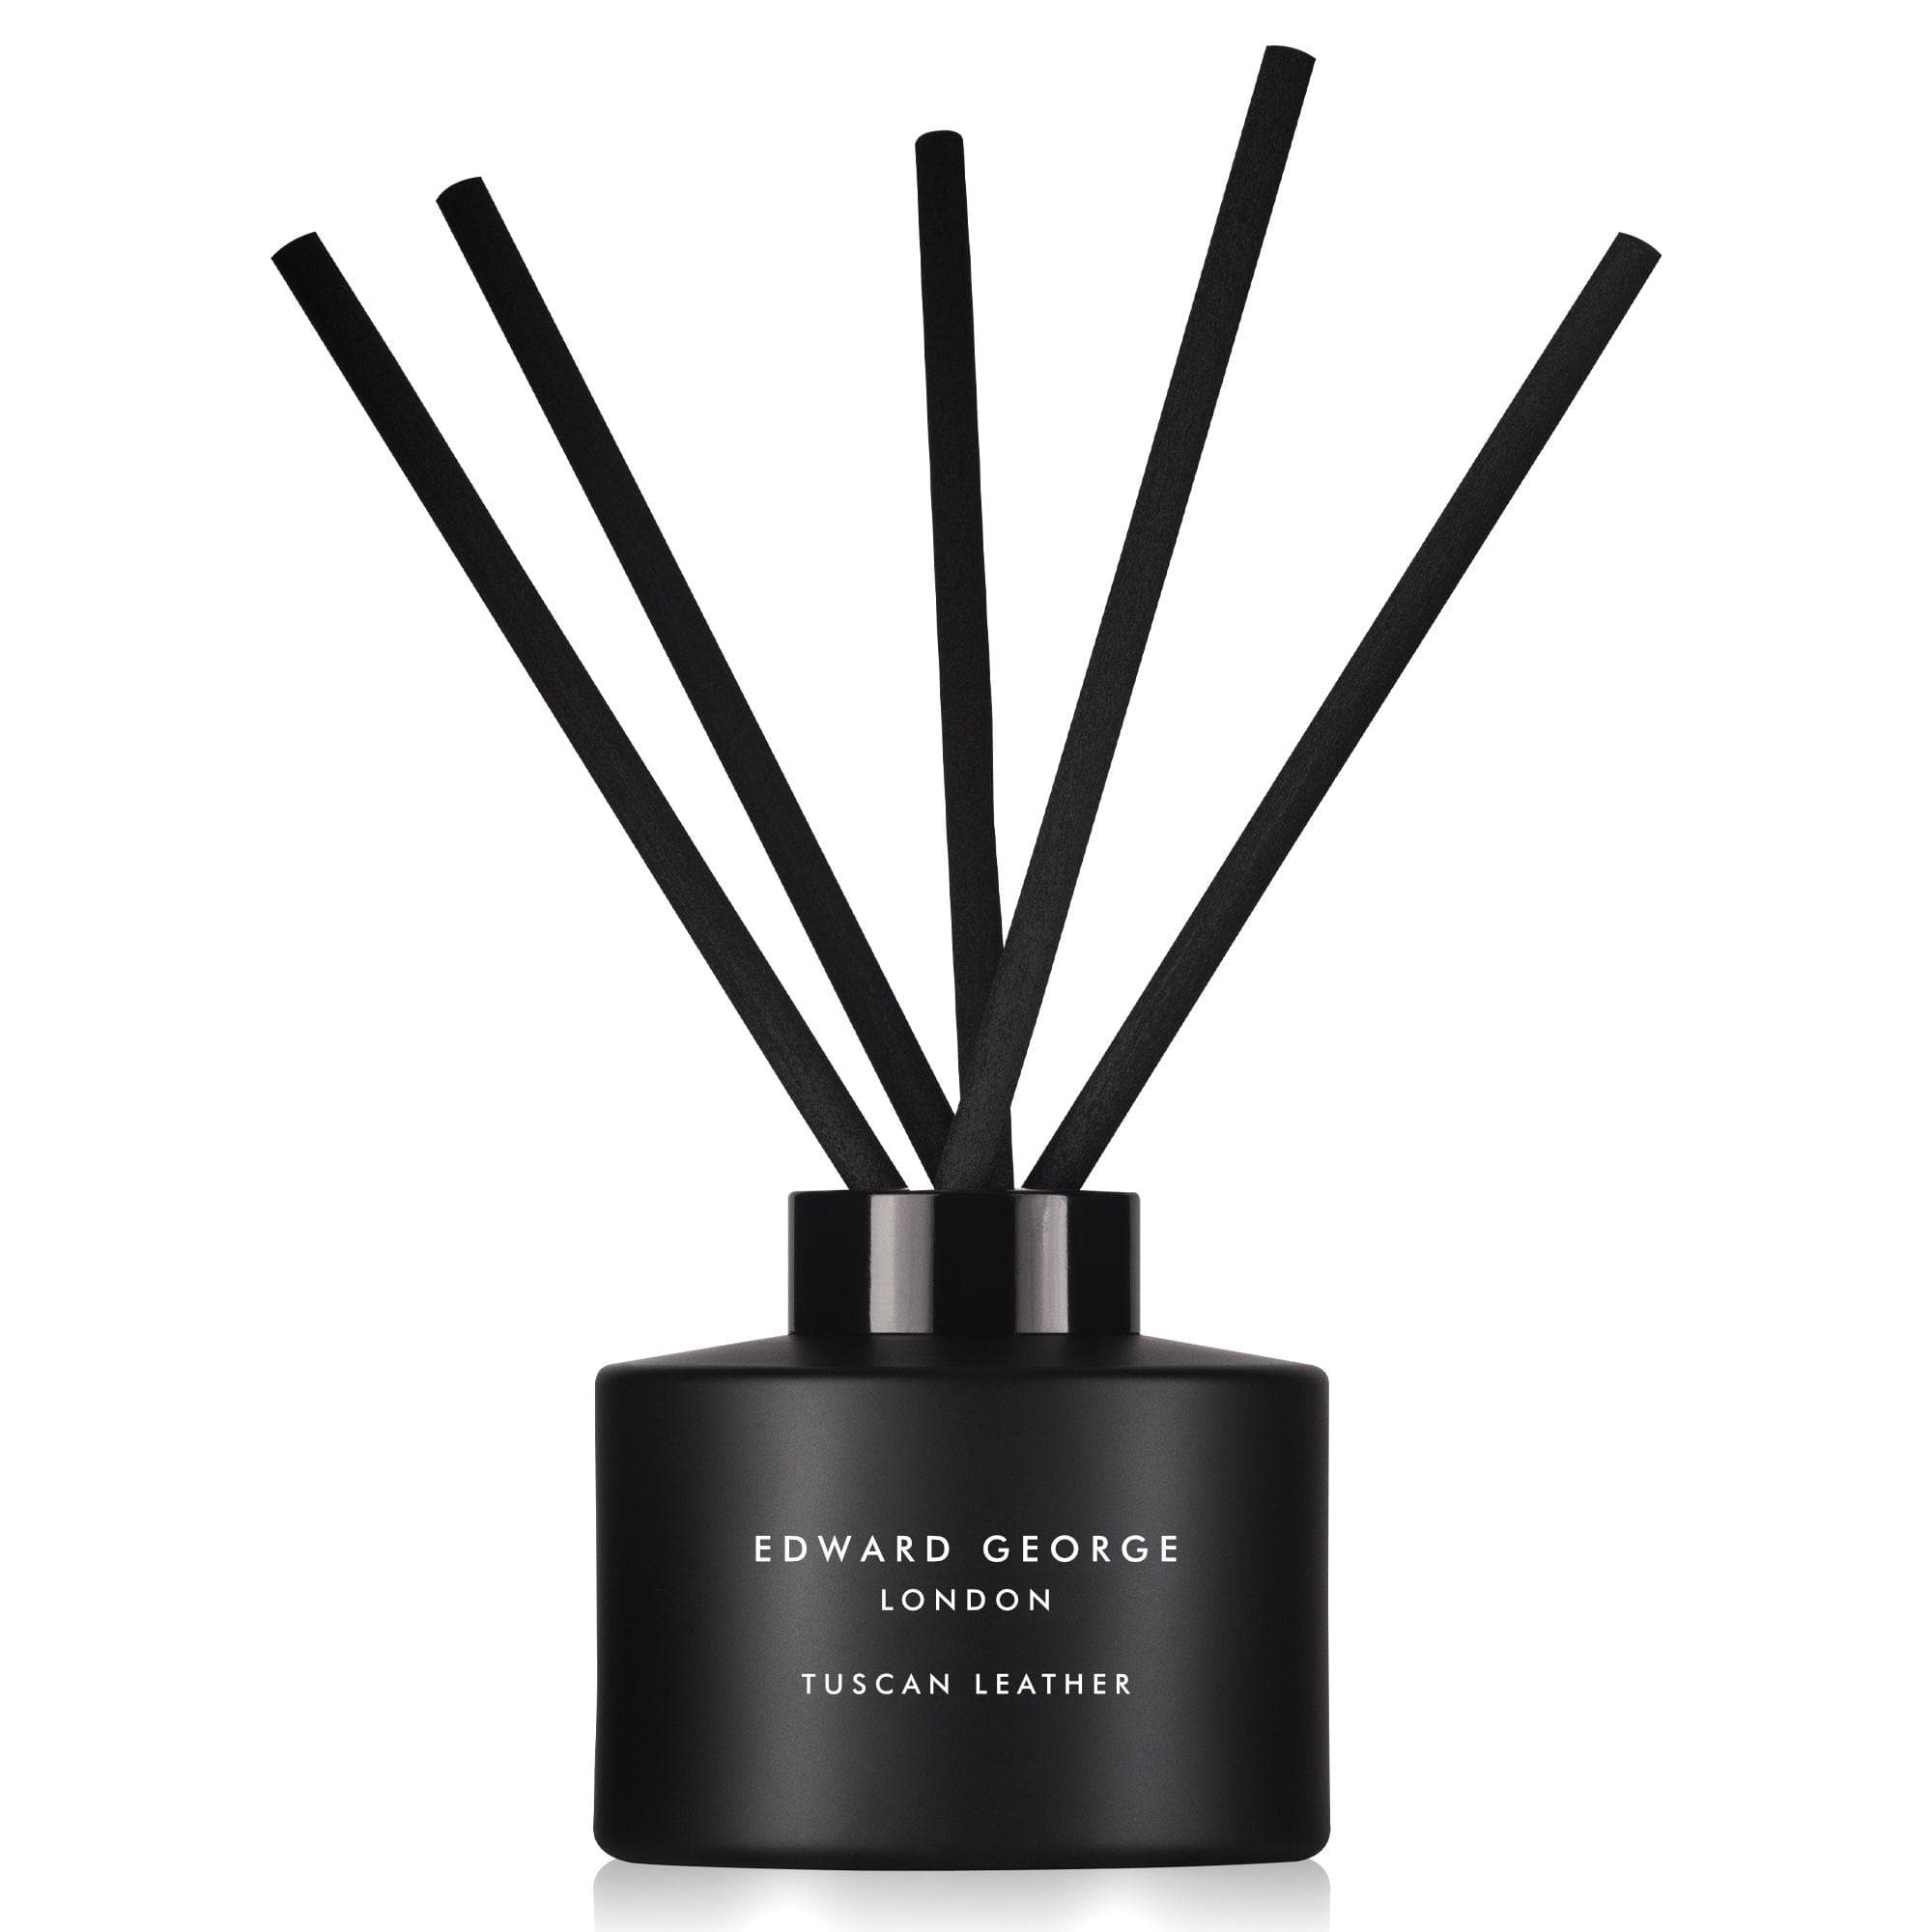 tuscan leather reed diffusers refills home fragrance decor room edward george london infographic luxury gift ritual scented england sticks scent oil diffuser refill women men black